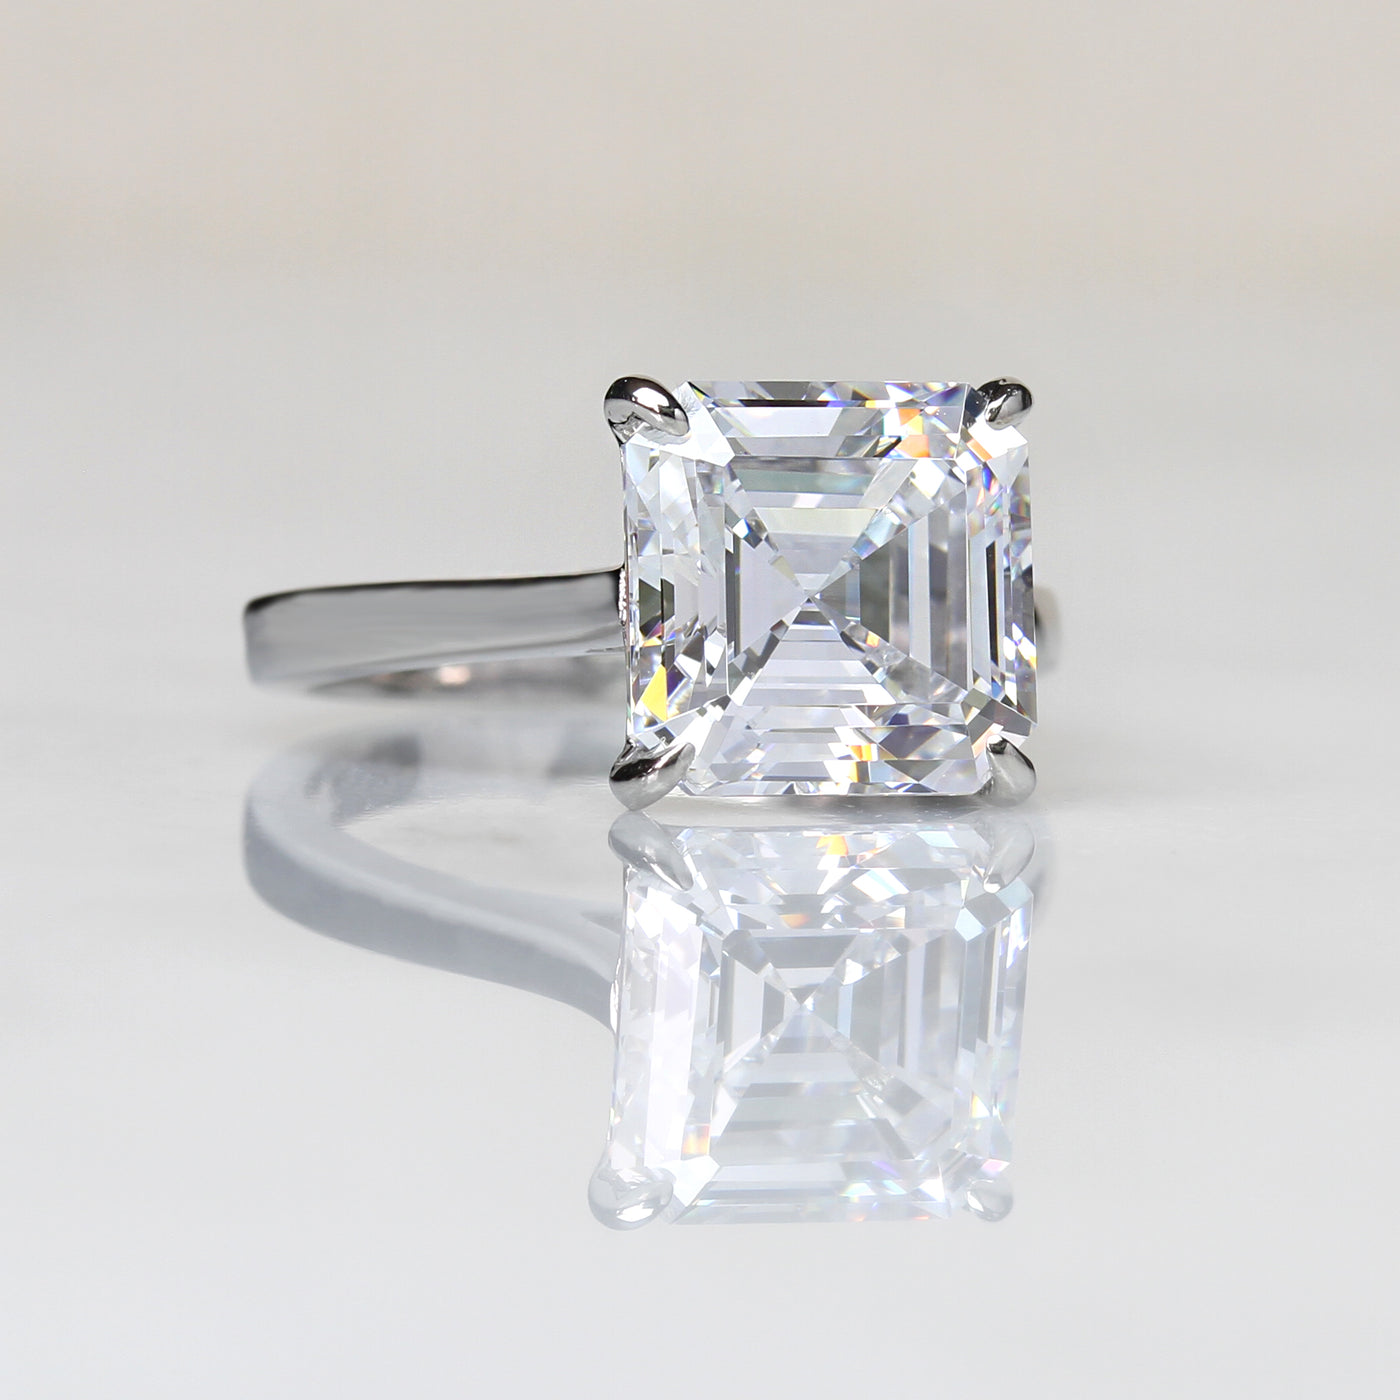 5 CT Asscher Cut Moissanite Solitaire Ring, Sterling Silver,